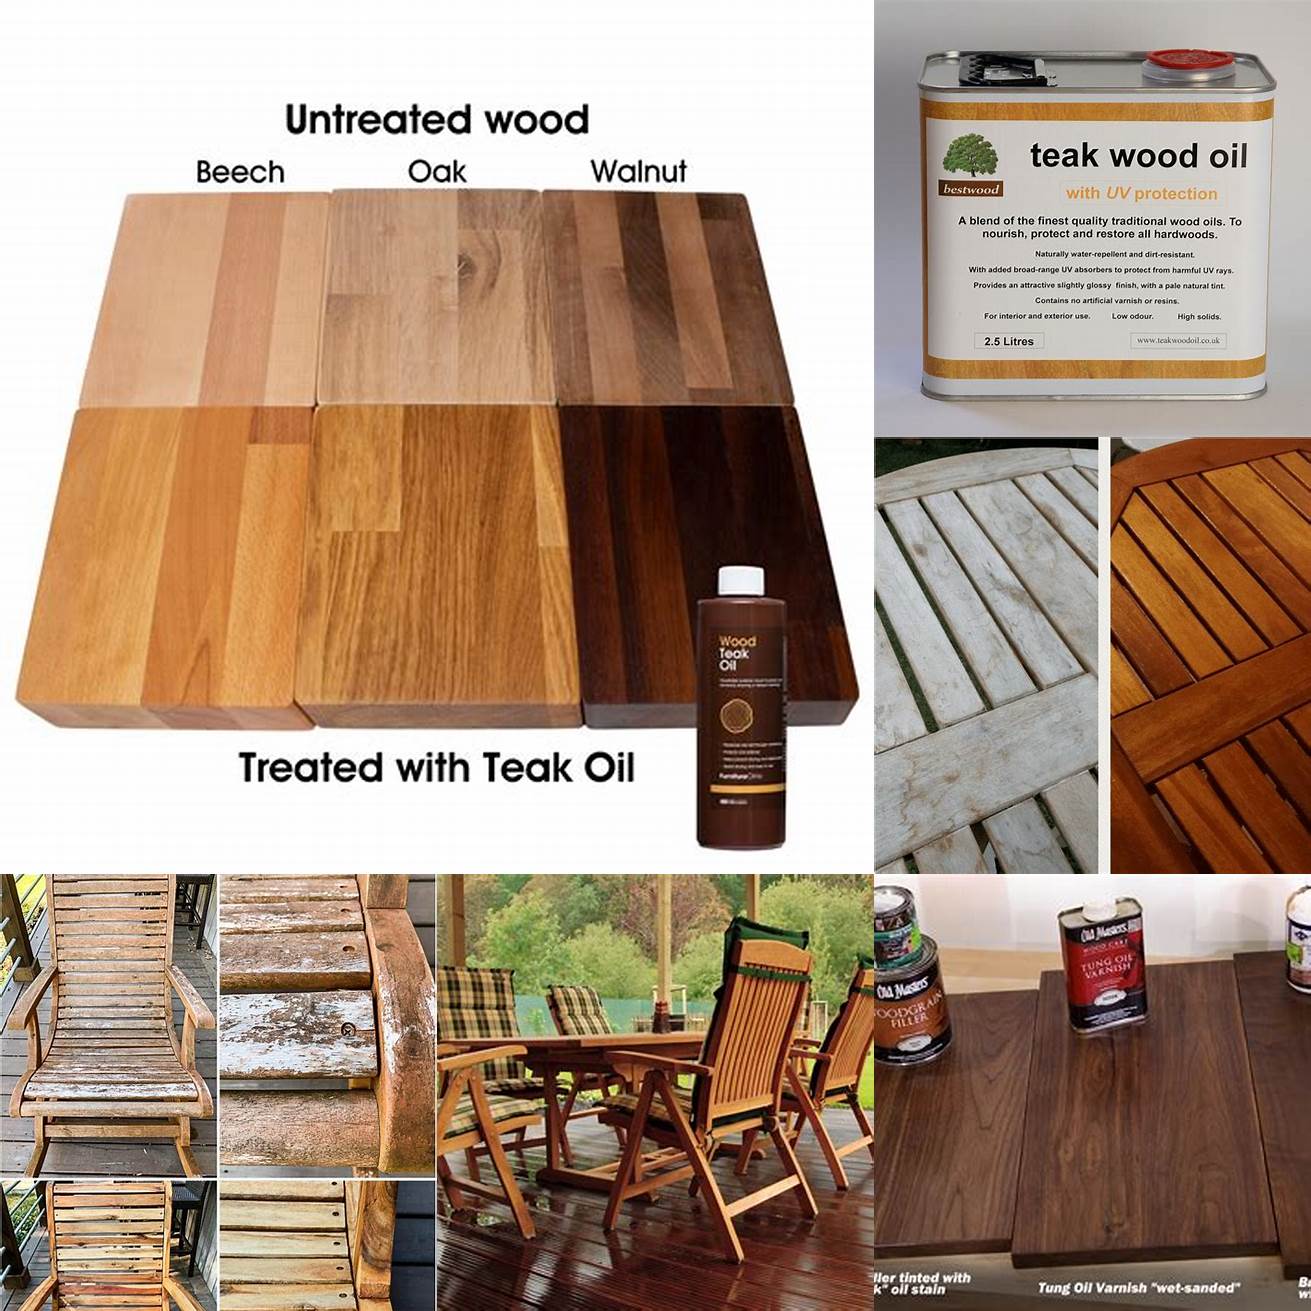 The types of wood that can be treated with teak oil